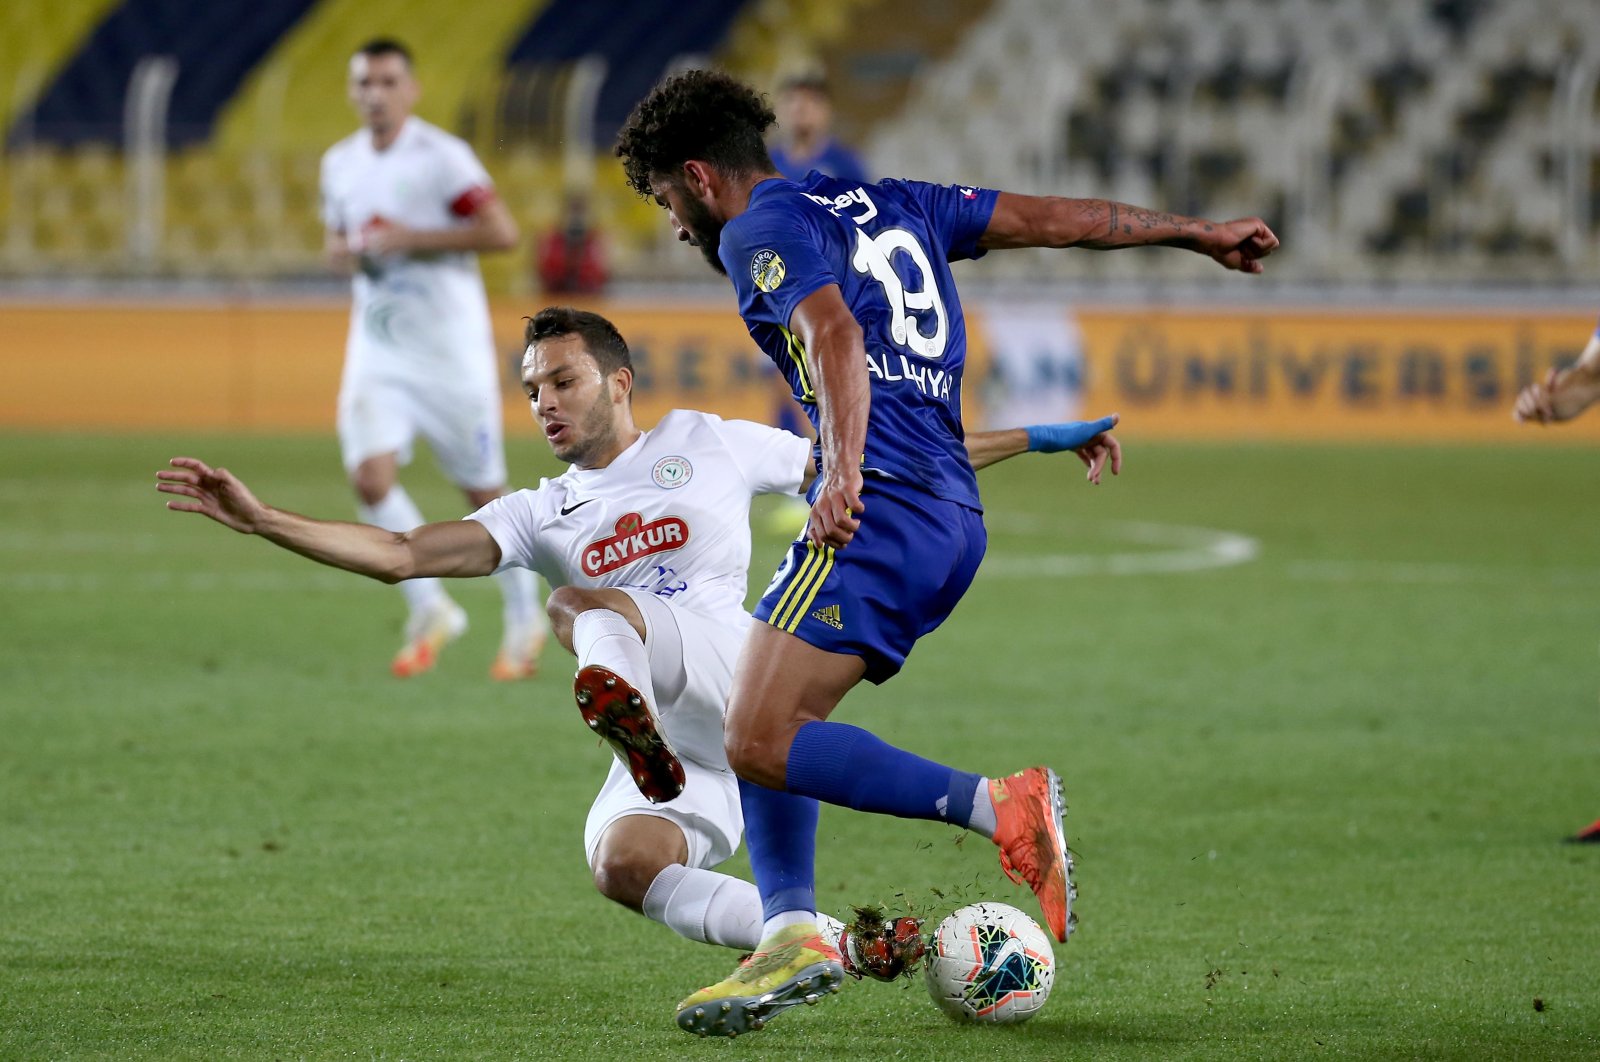 Fenerbahçe's Allahyar Sayyadmanesh (R) and Rizespor's Omar Talbi compete for the ball during a Süper Lig match in Istanbul, Turkey, July 25, 2020. (AA Photo)